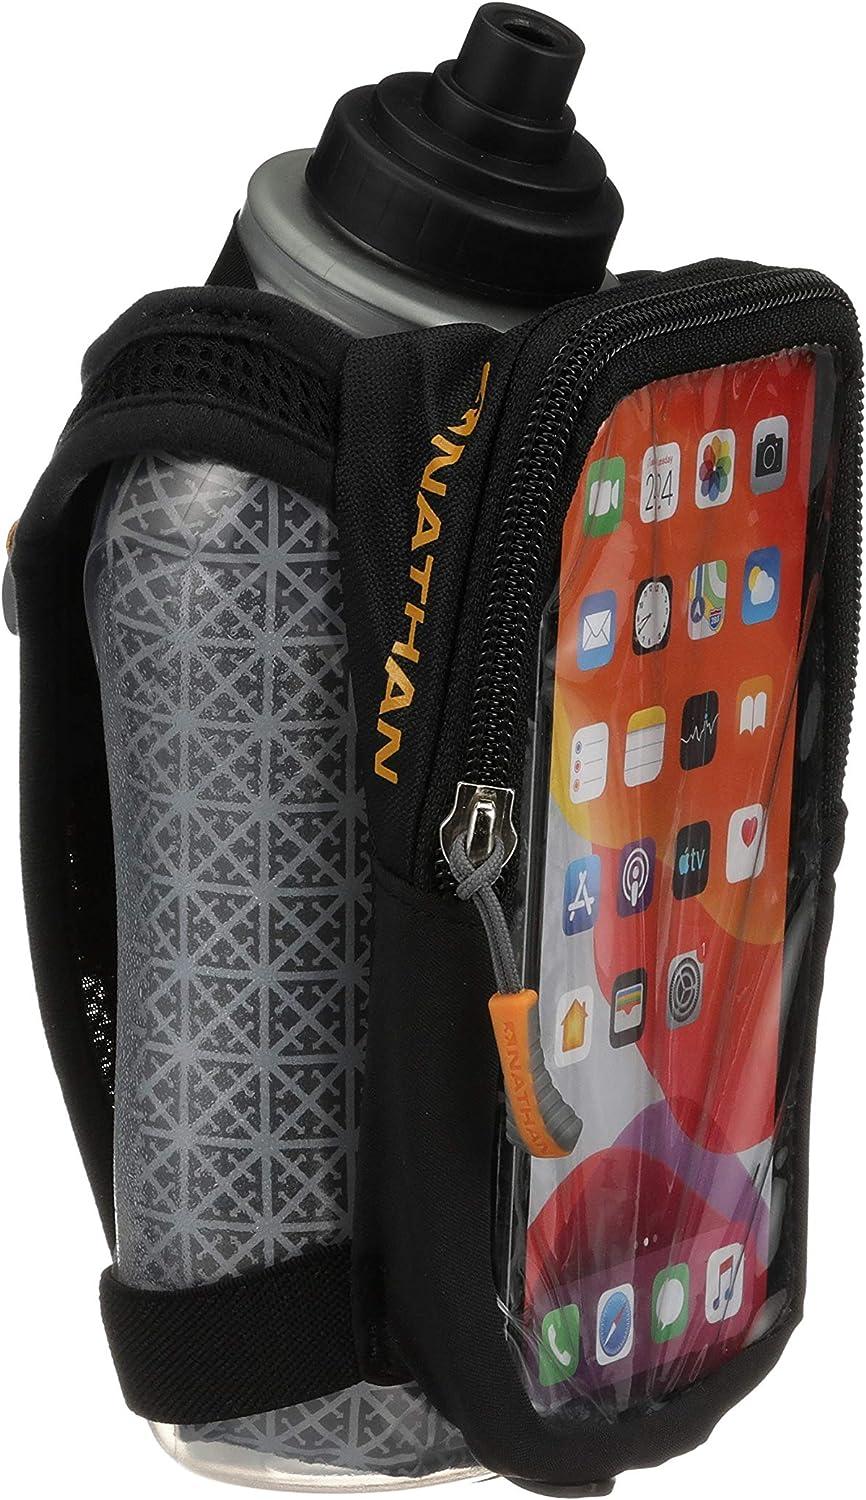 Nathan Handhelds  Gear & Accessories for Runners